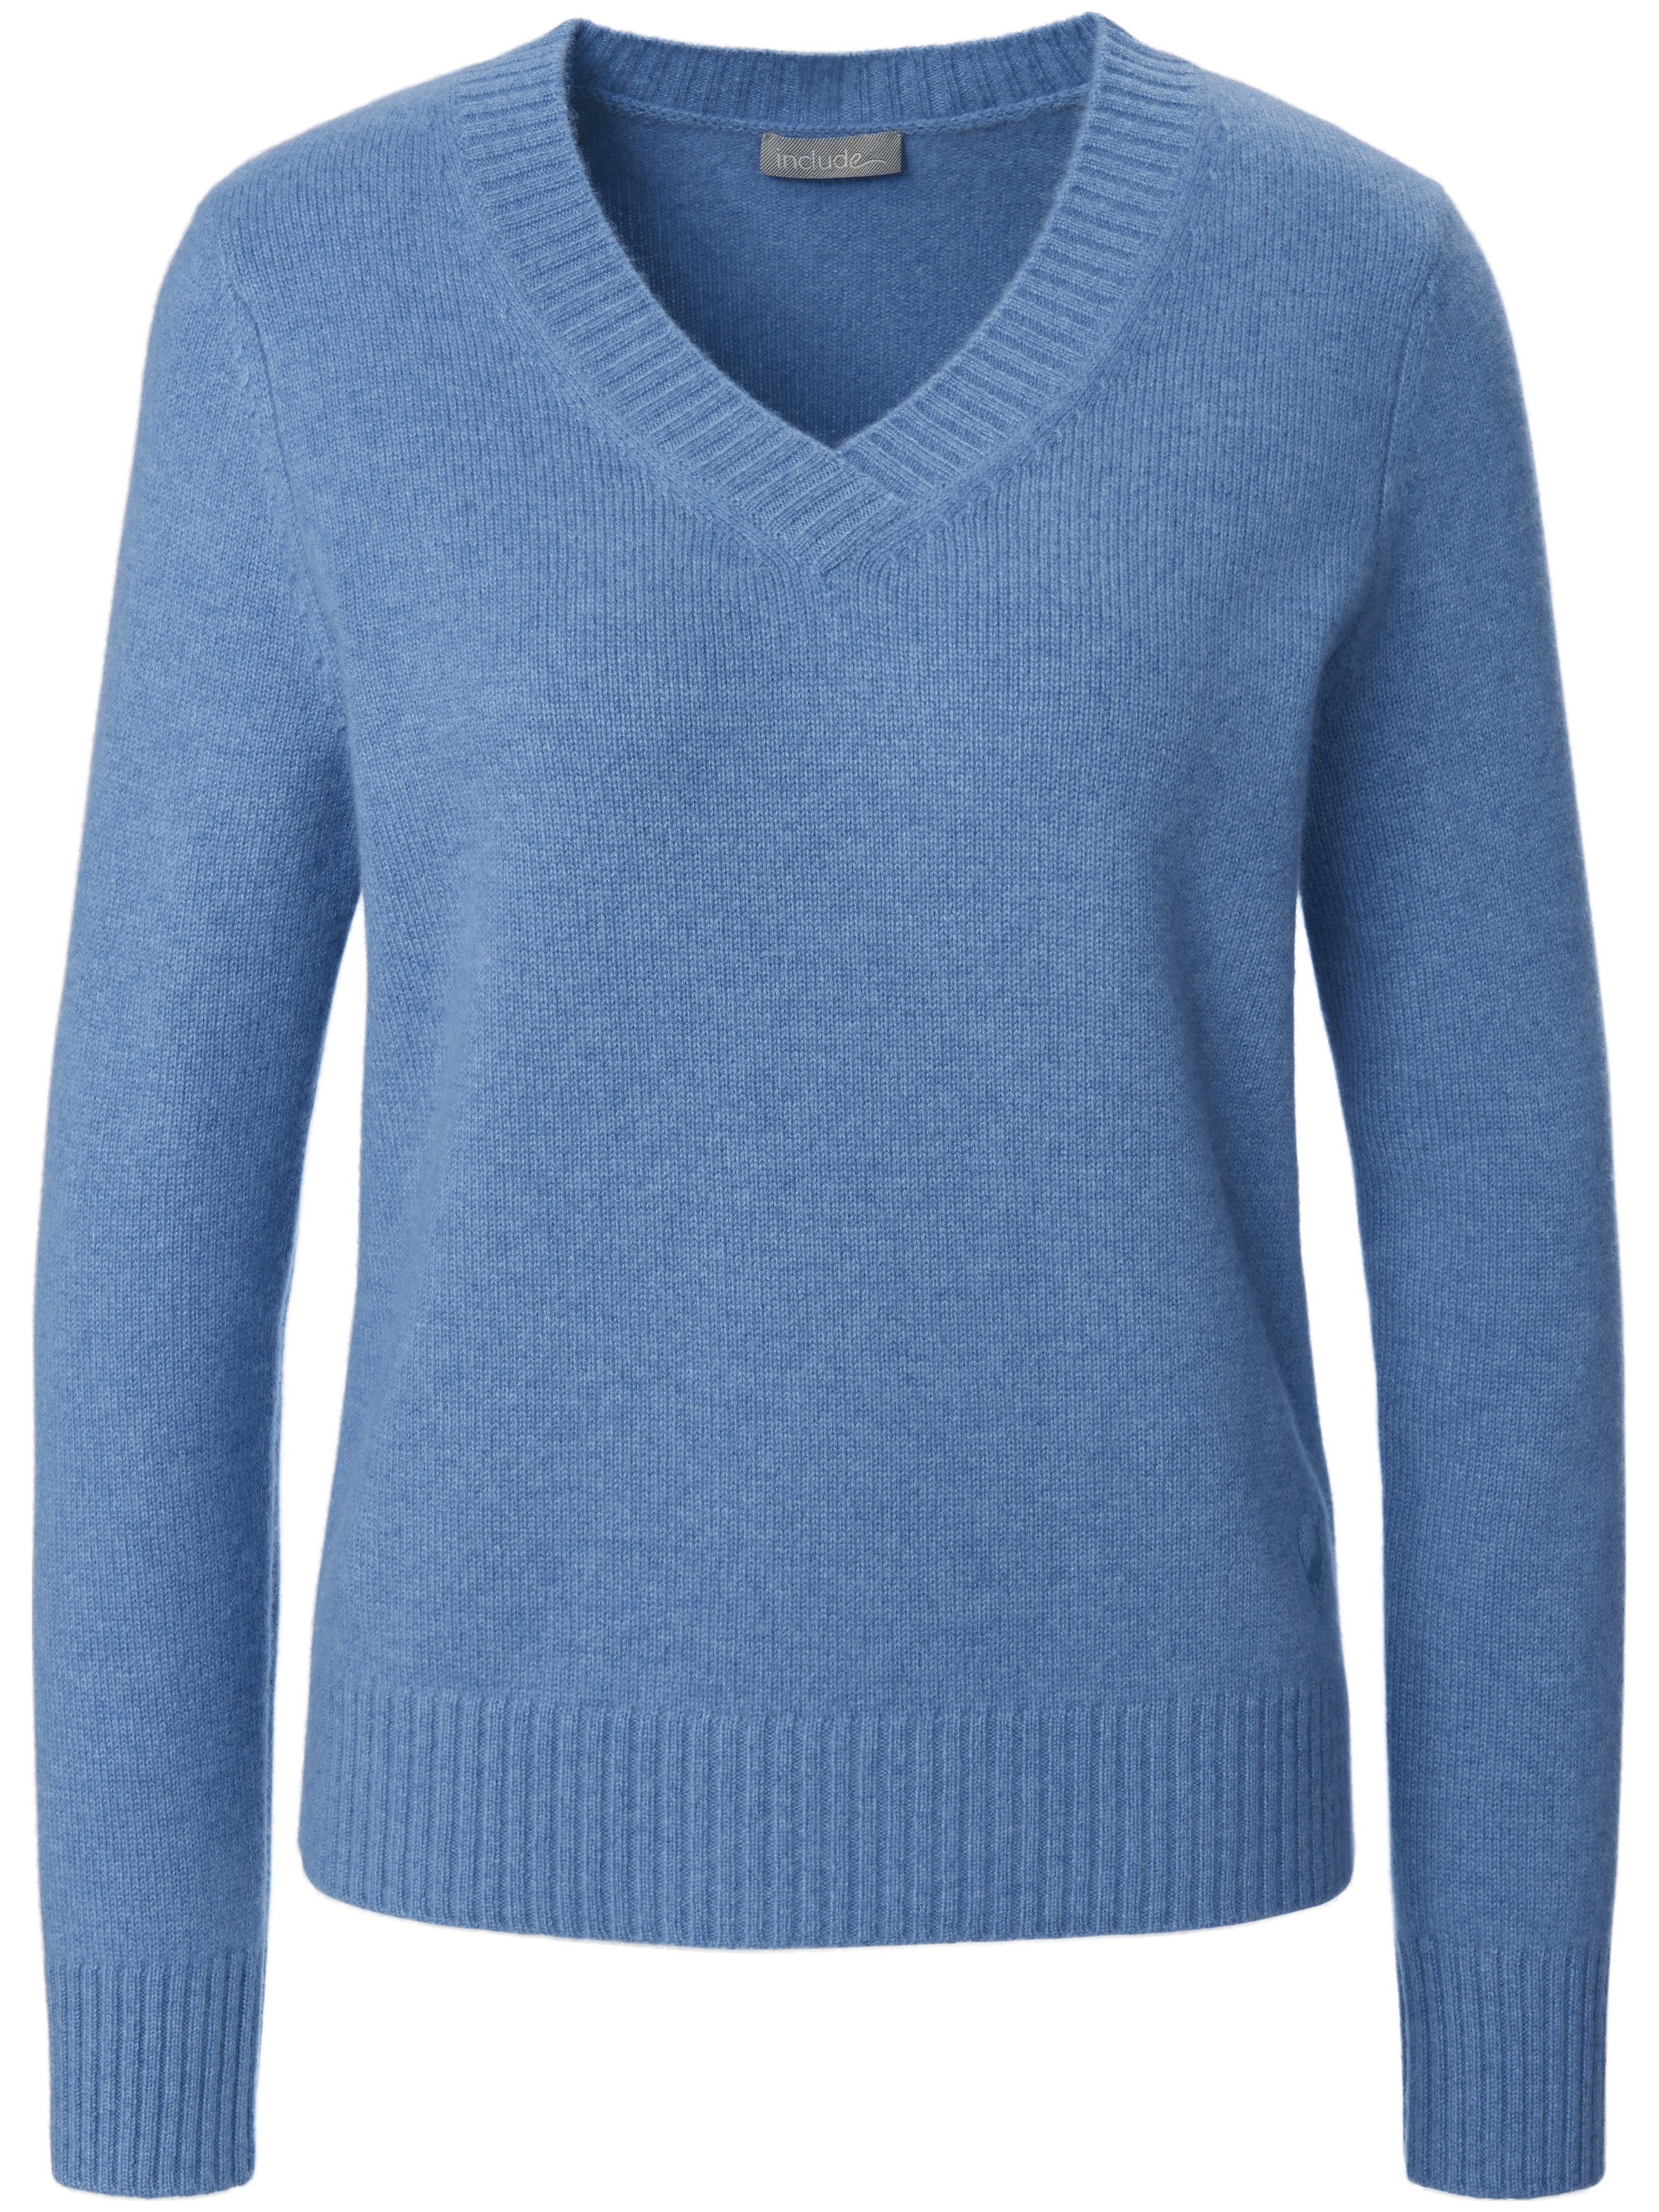 Le pull 100% cachemire  include bleu taille 50